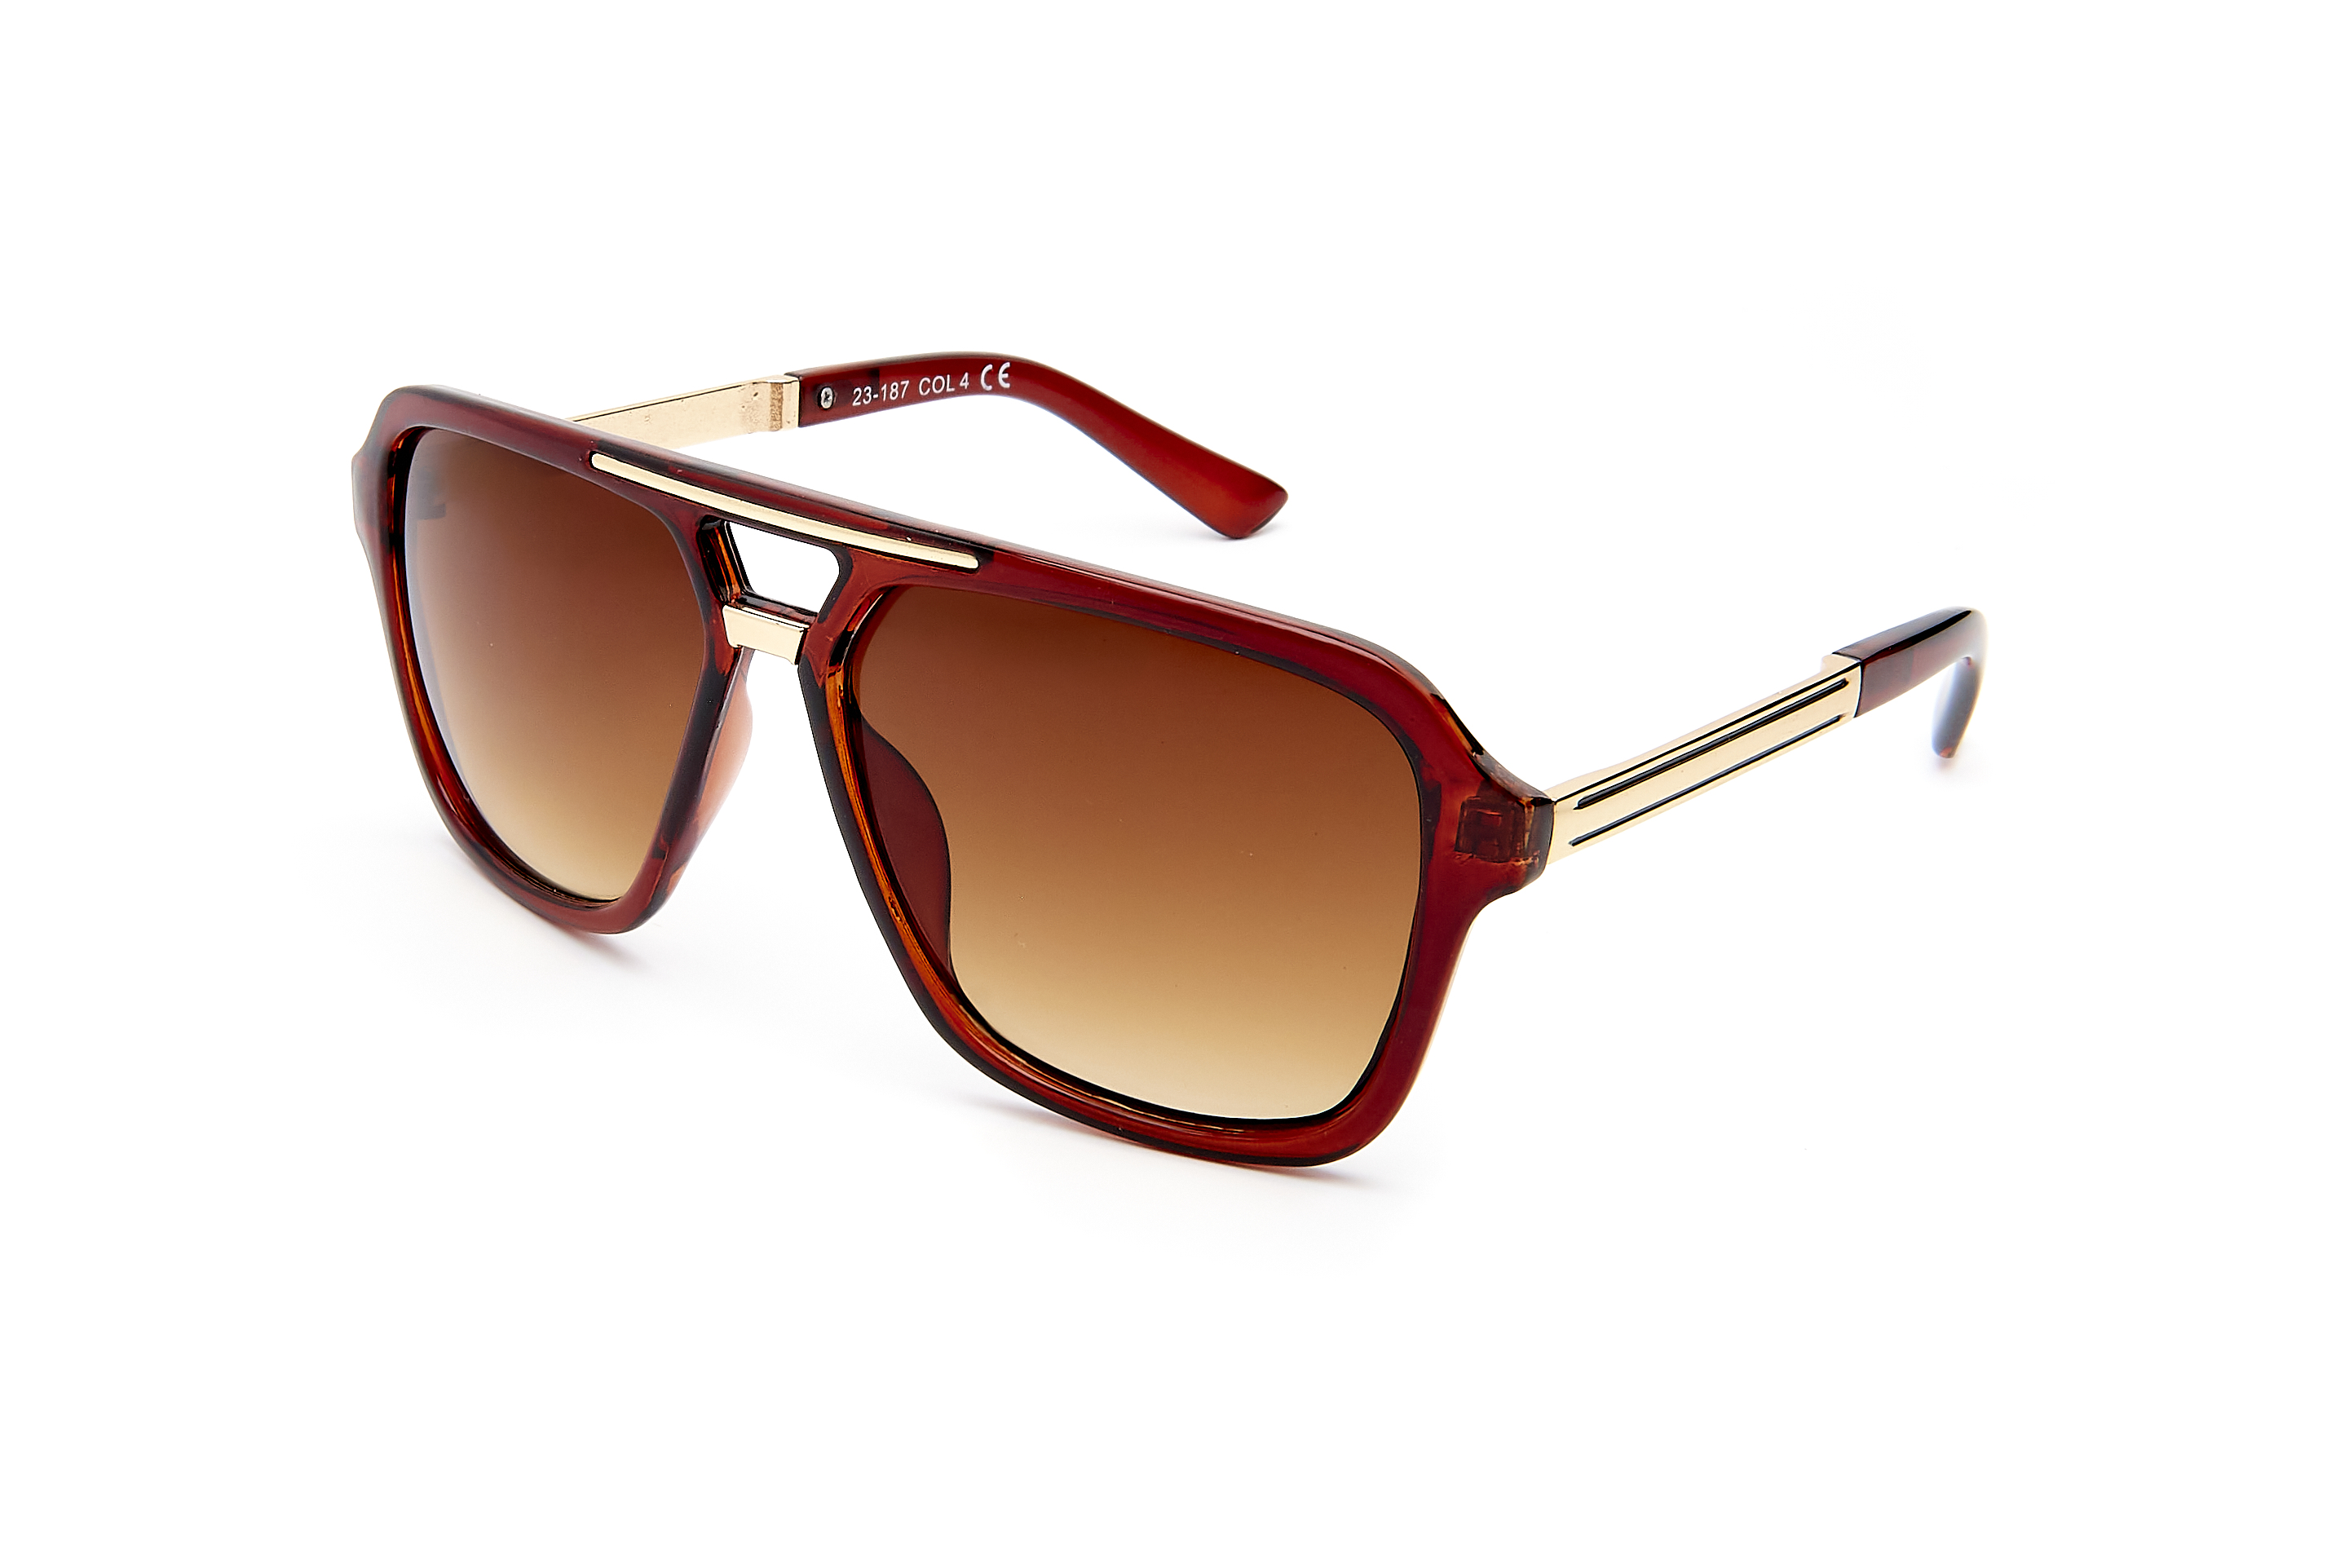 Luxury aviator transparent brown and gold